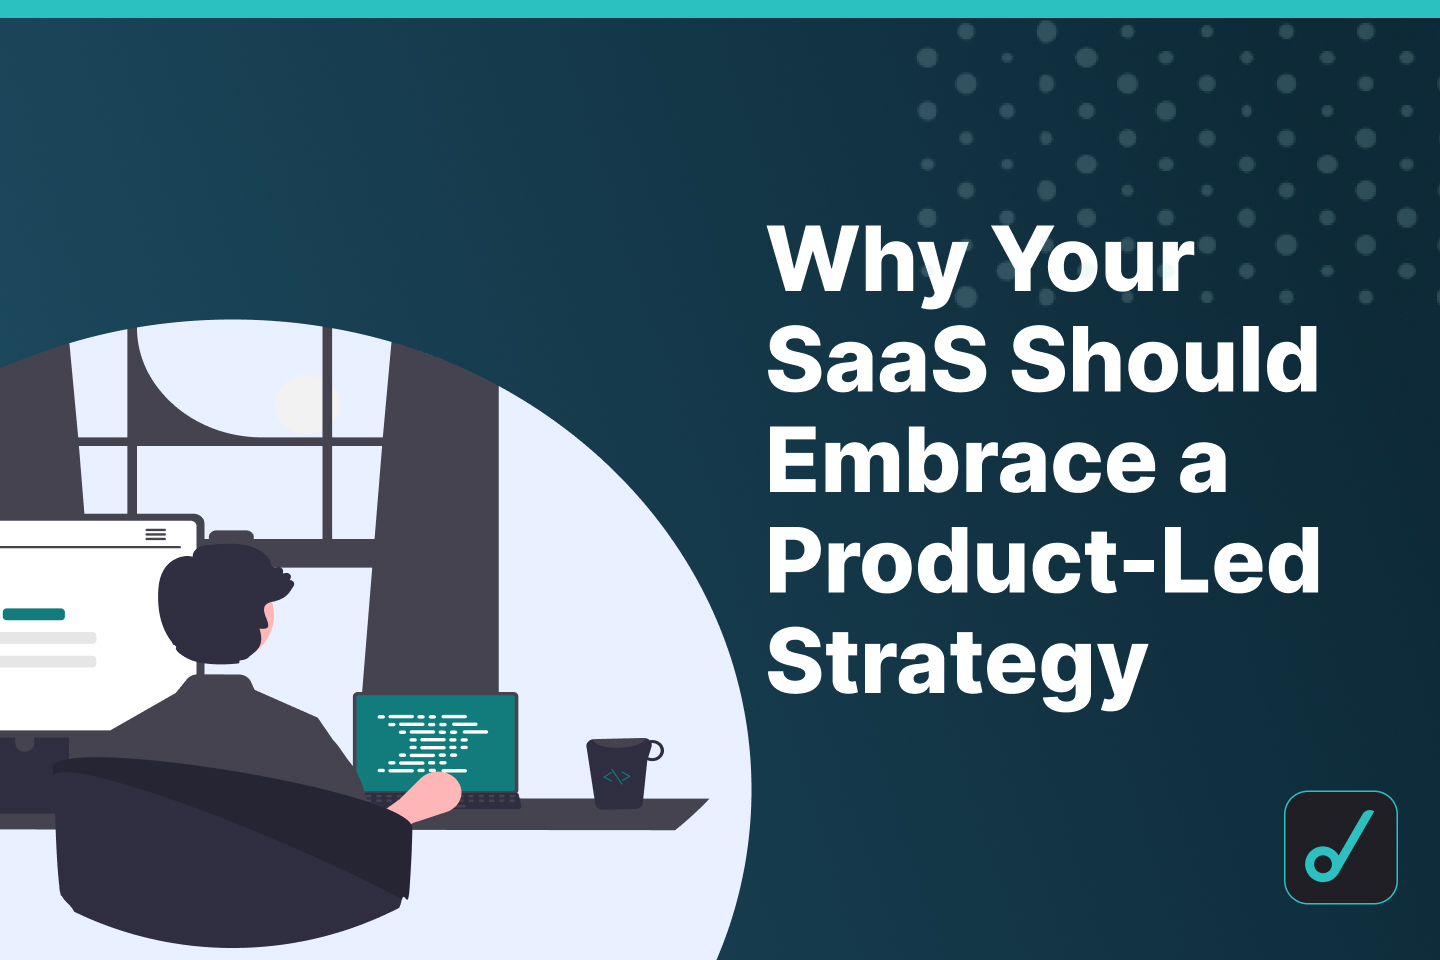 5 reasons why your SaaS needs to embrace product-led growth